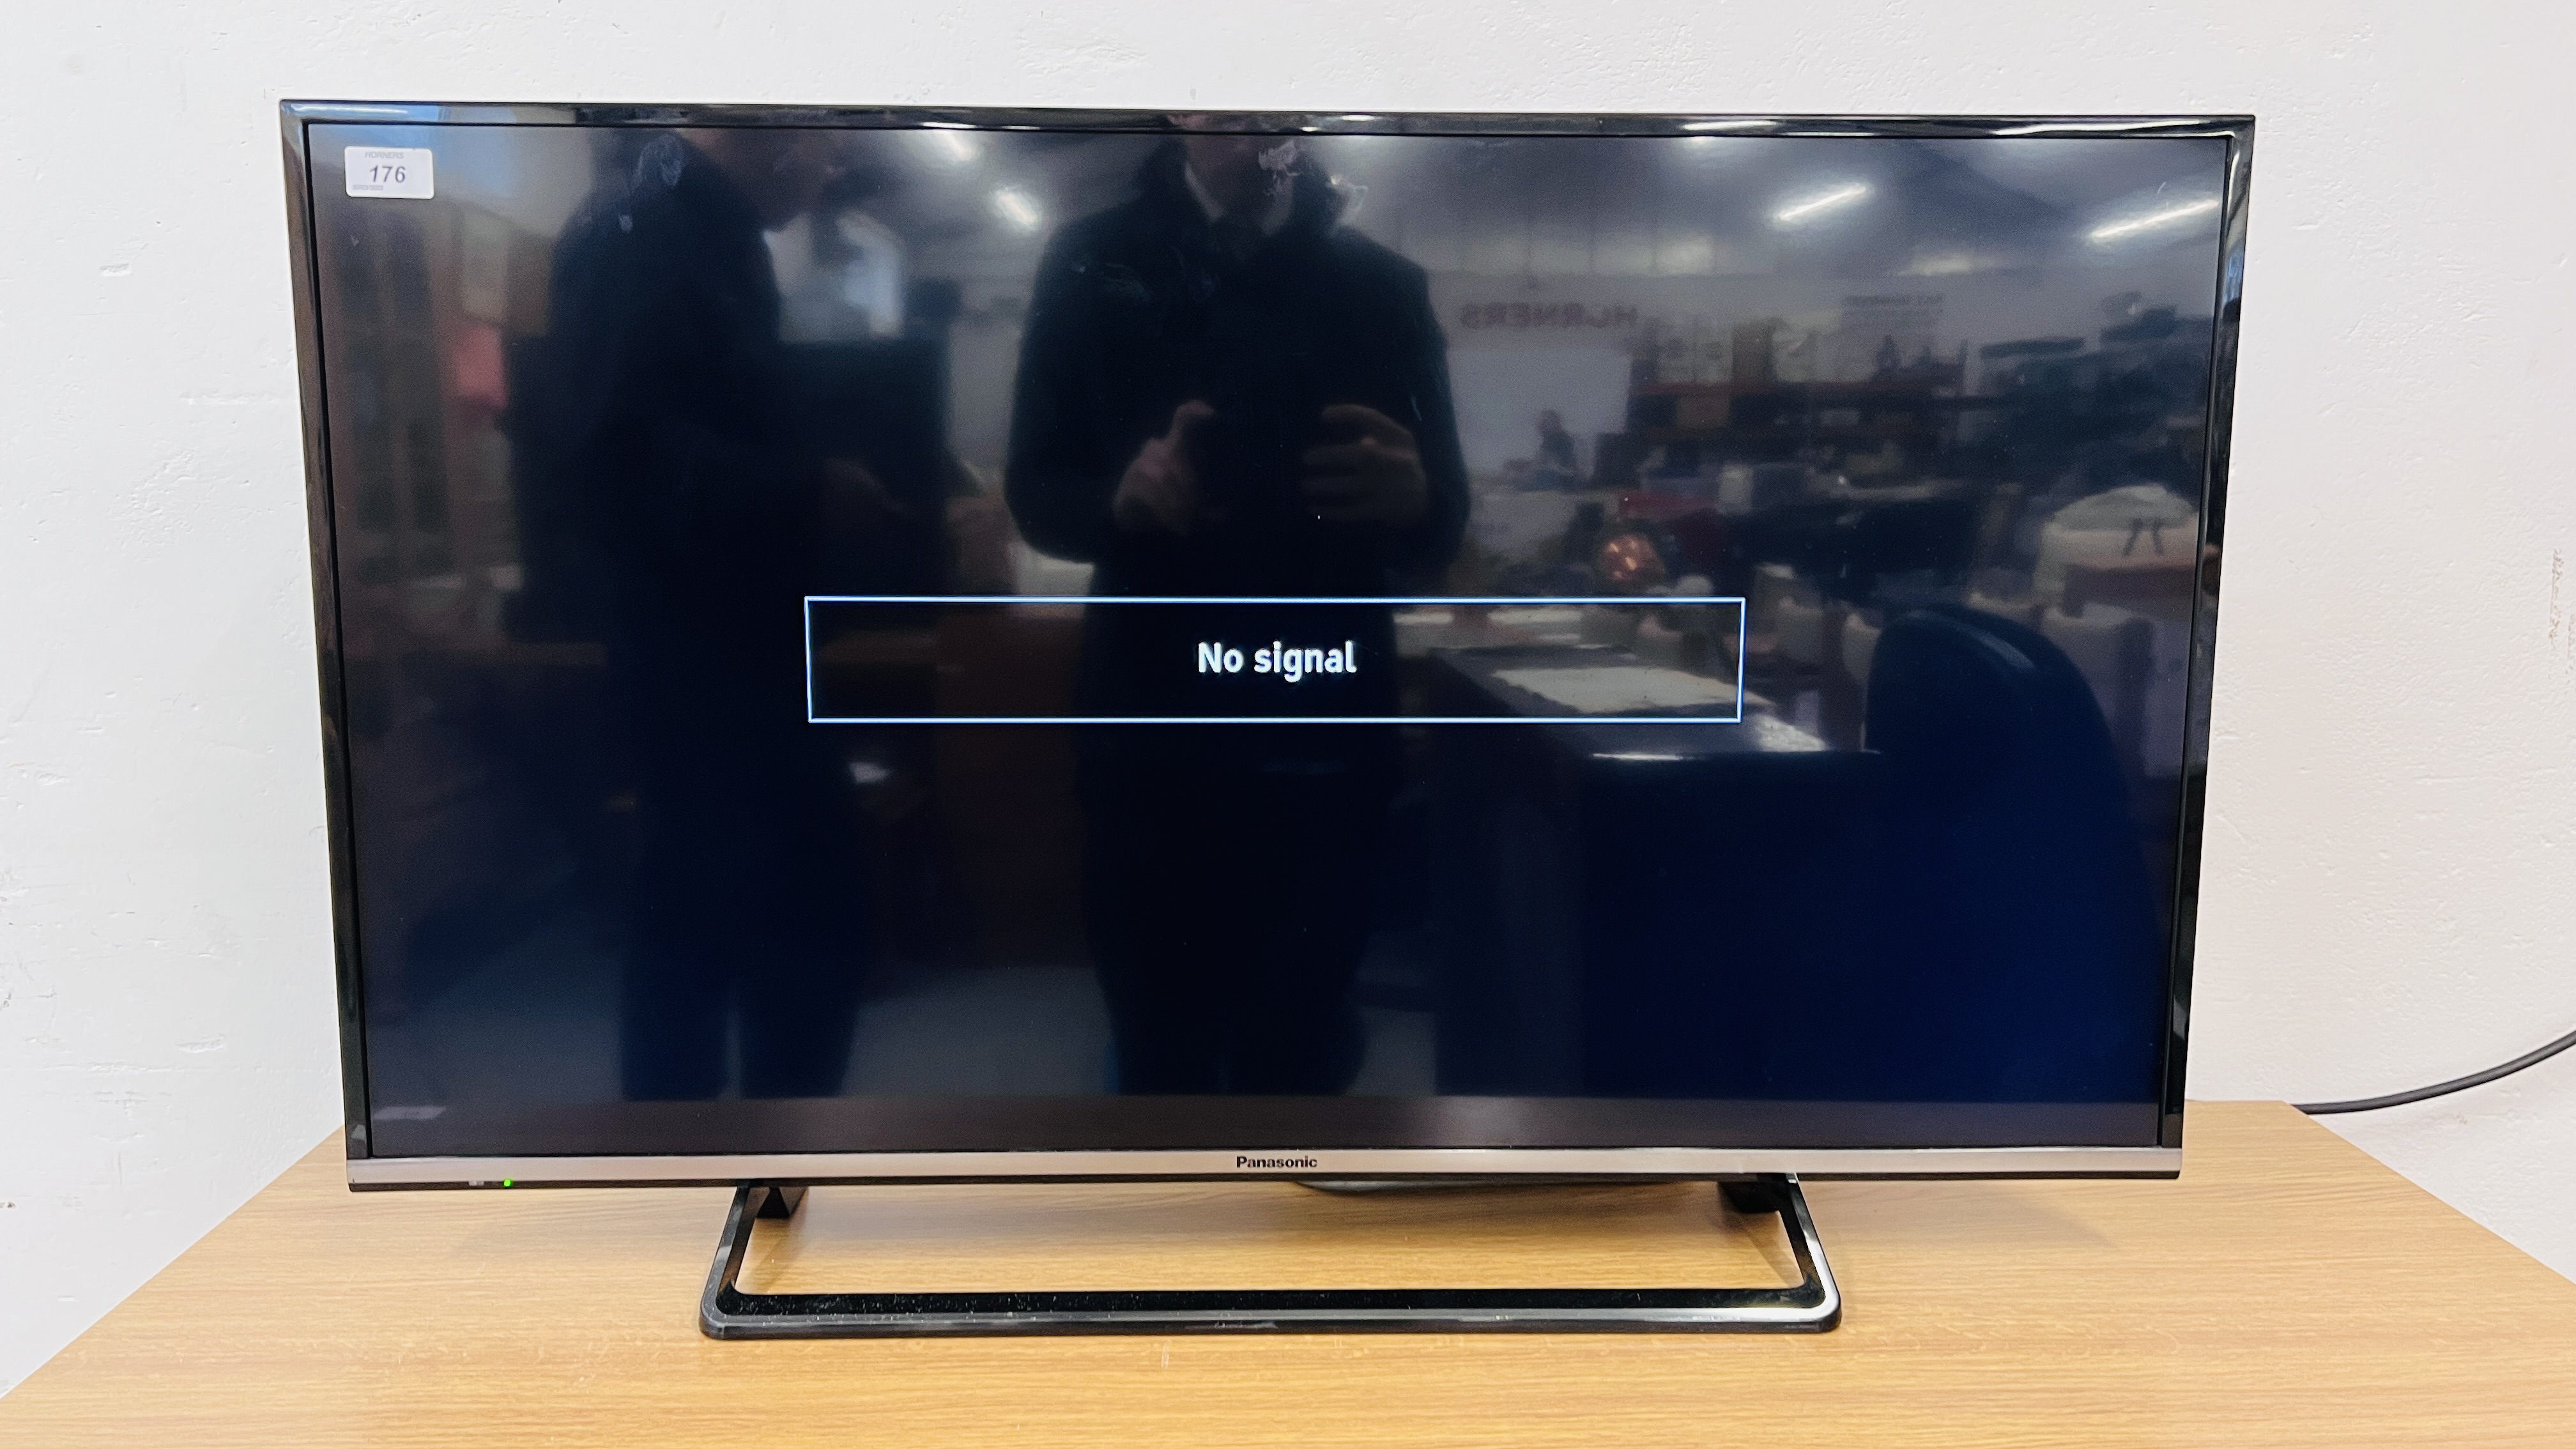 PANASONIC 40 INCH SMART TELEVISION COMPLETE WITH REMOTE - SOLD AS SEEN - Image 8 of 9